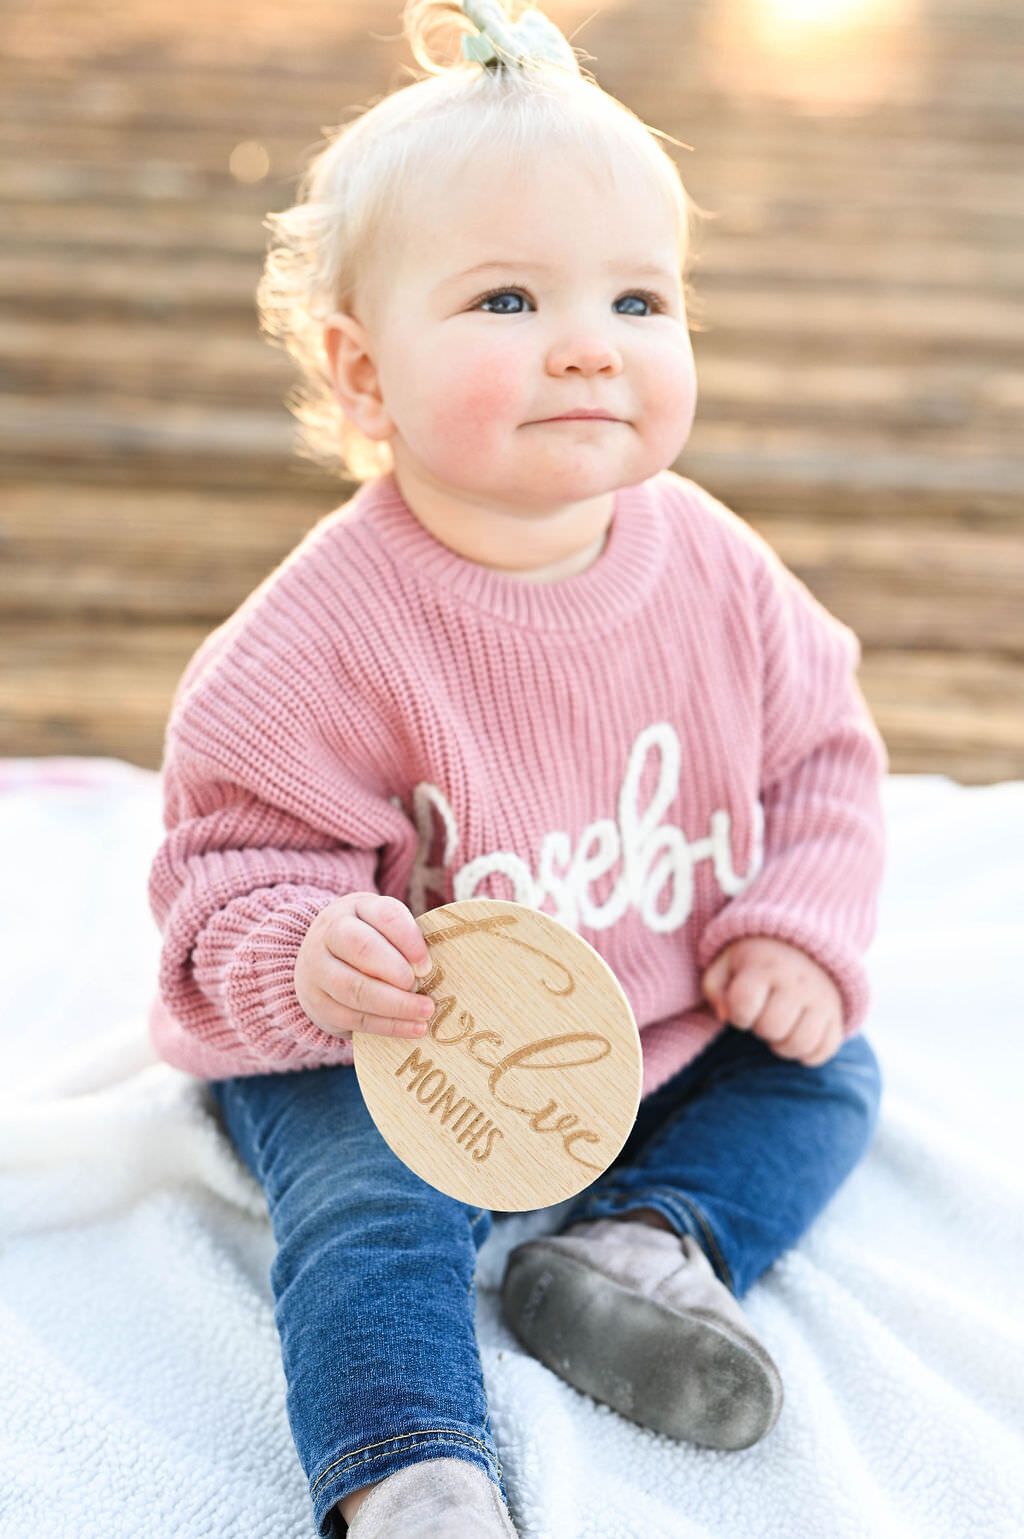 A baby holding a wooden circle that says "twelve months"